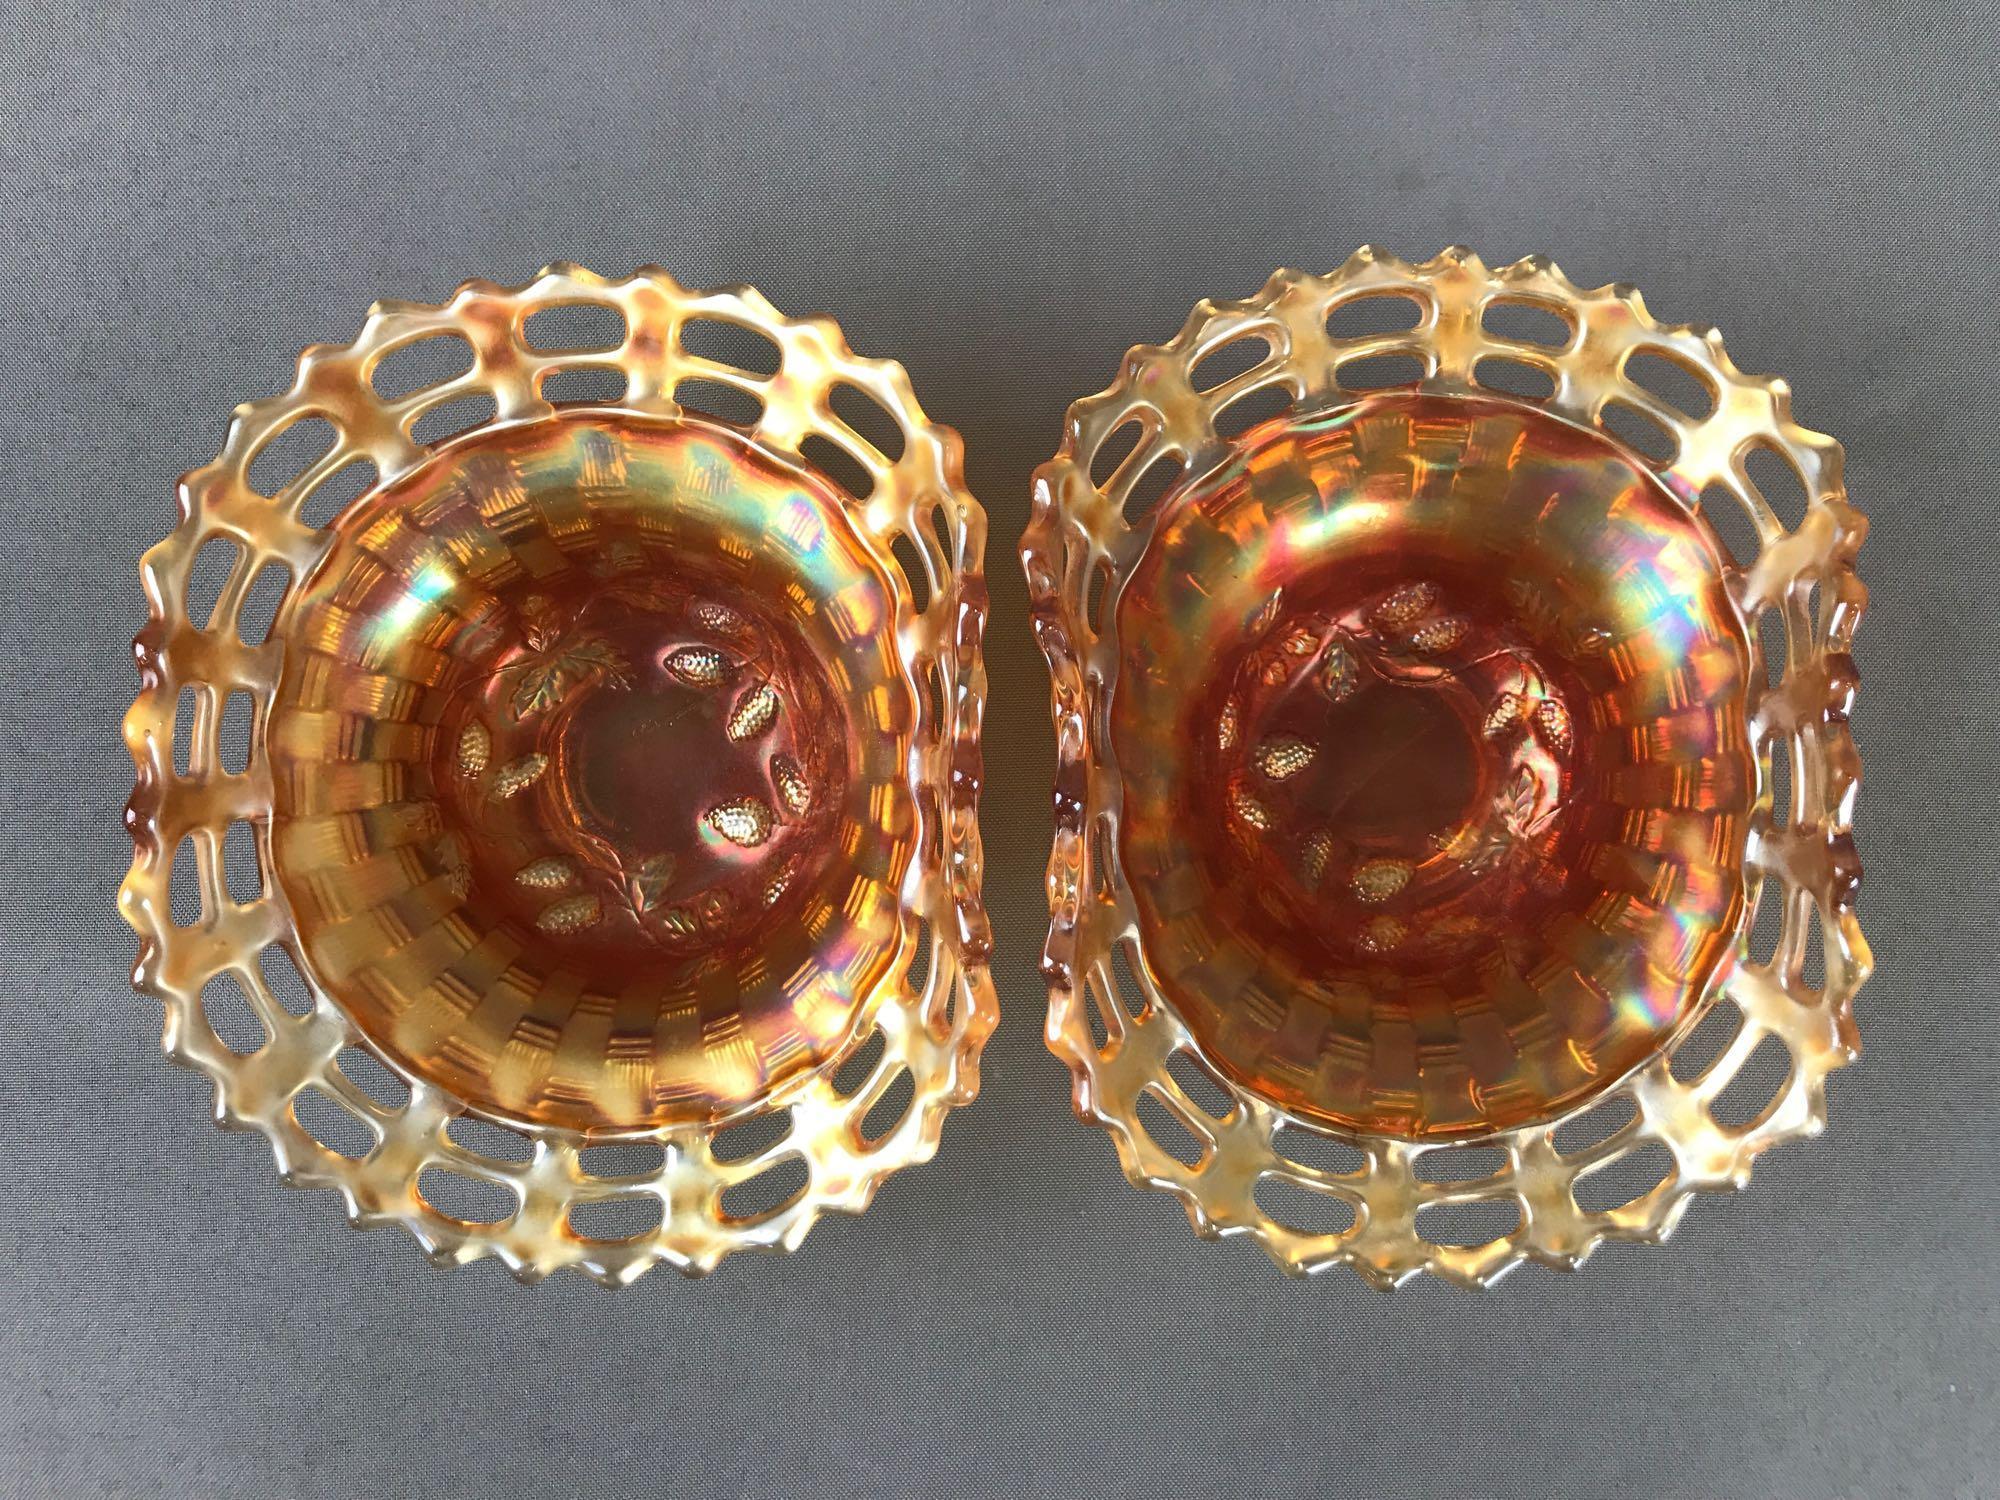 Group of 3 Antique Marigold Fenton Carnival Glass bowls